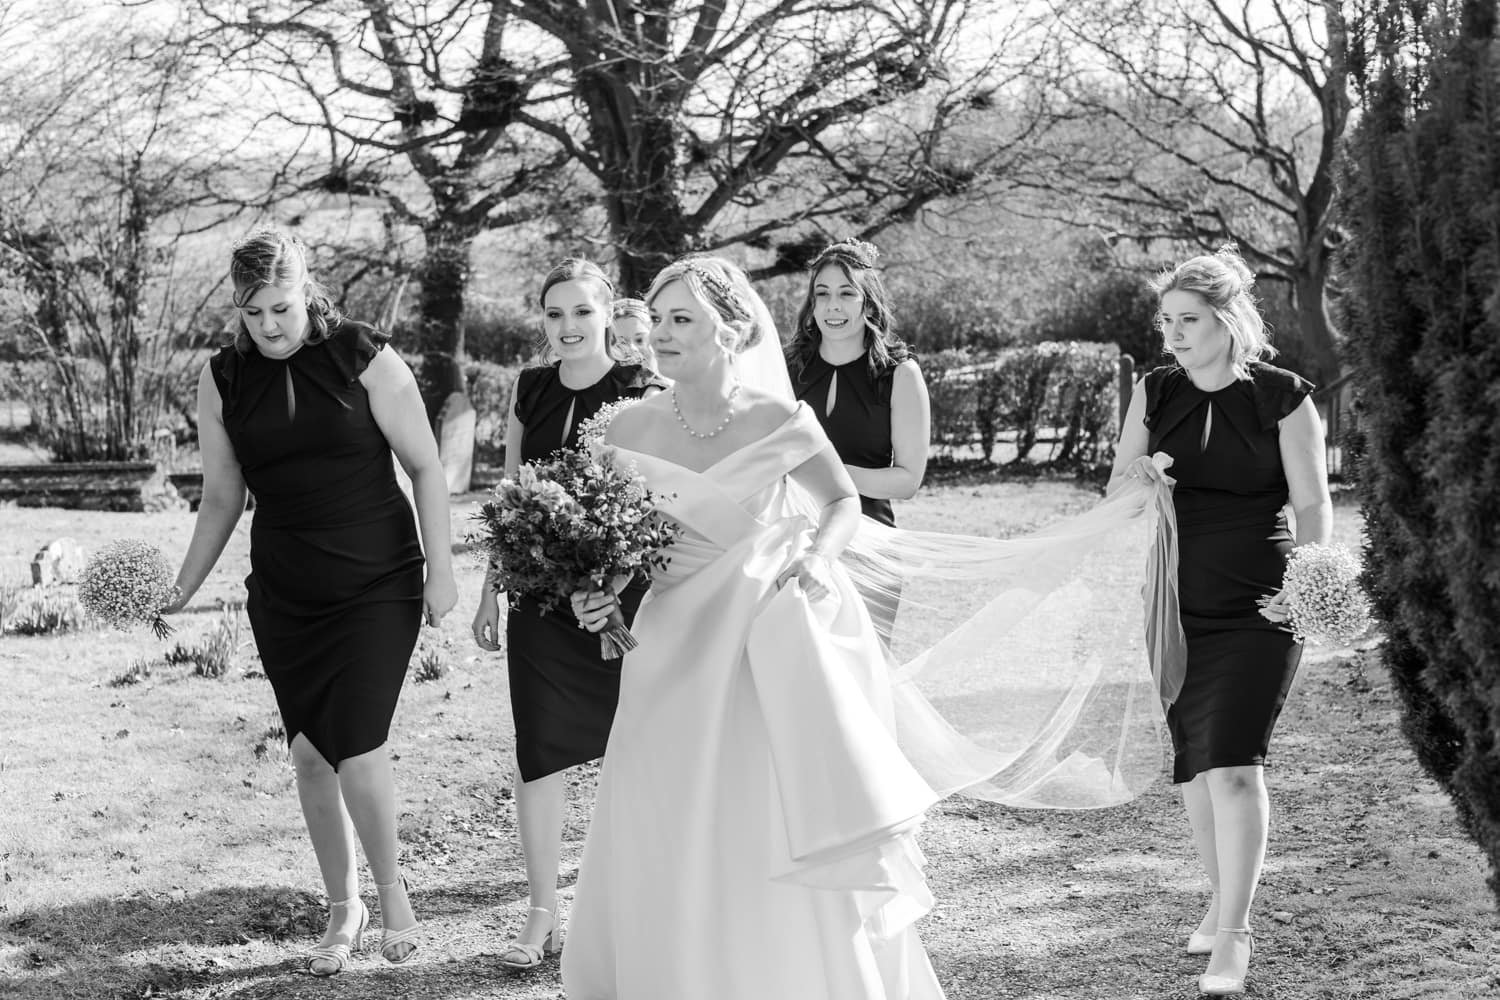 Wedding Photography Colchester